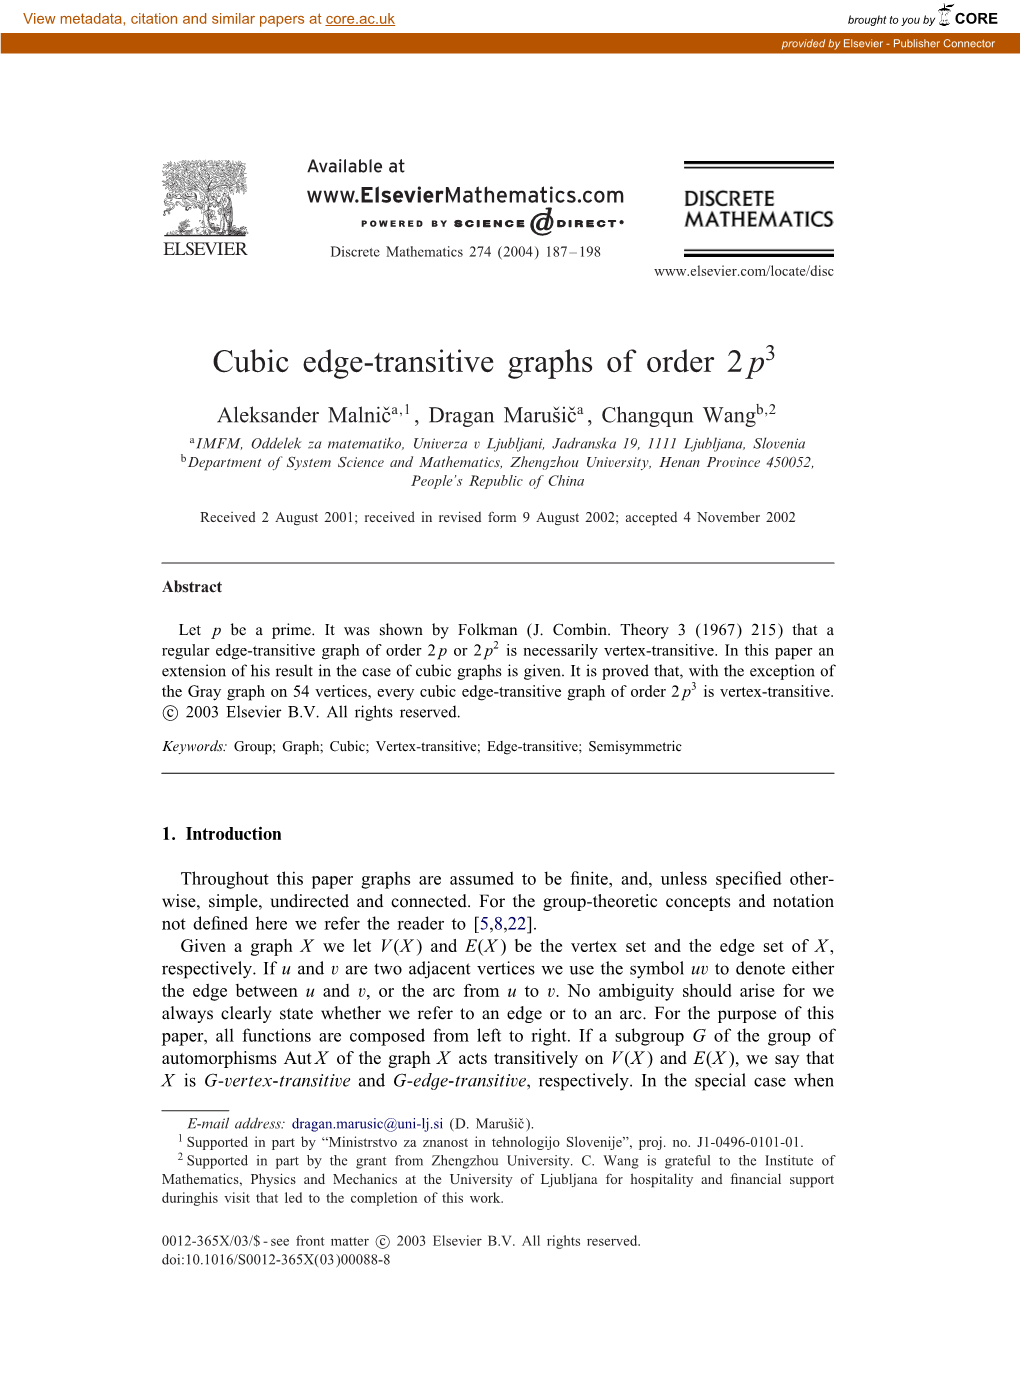 Cubic Edge-Transitive Graphs of Order 2P3